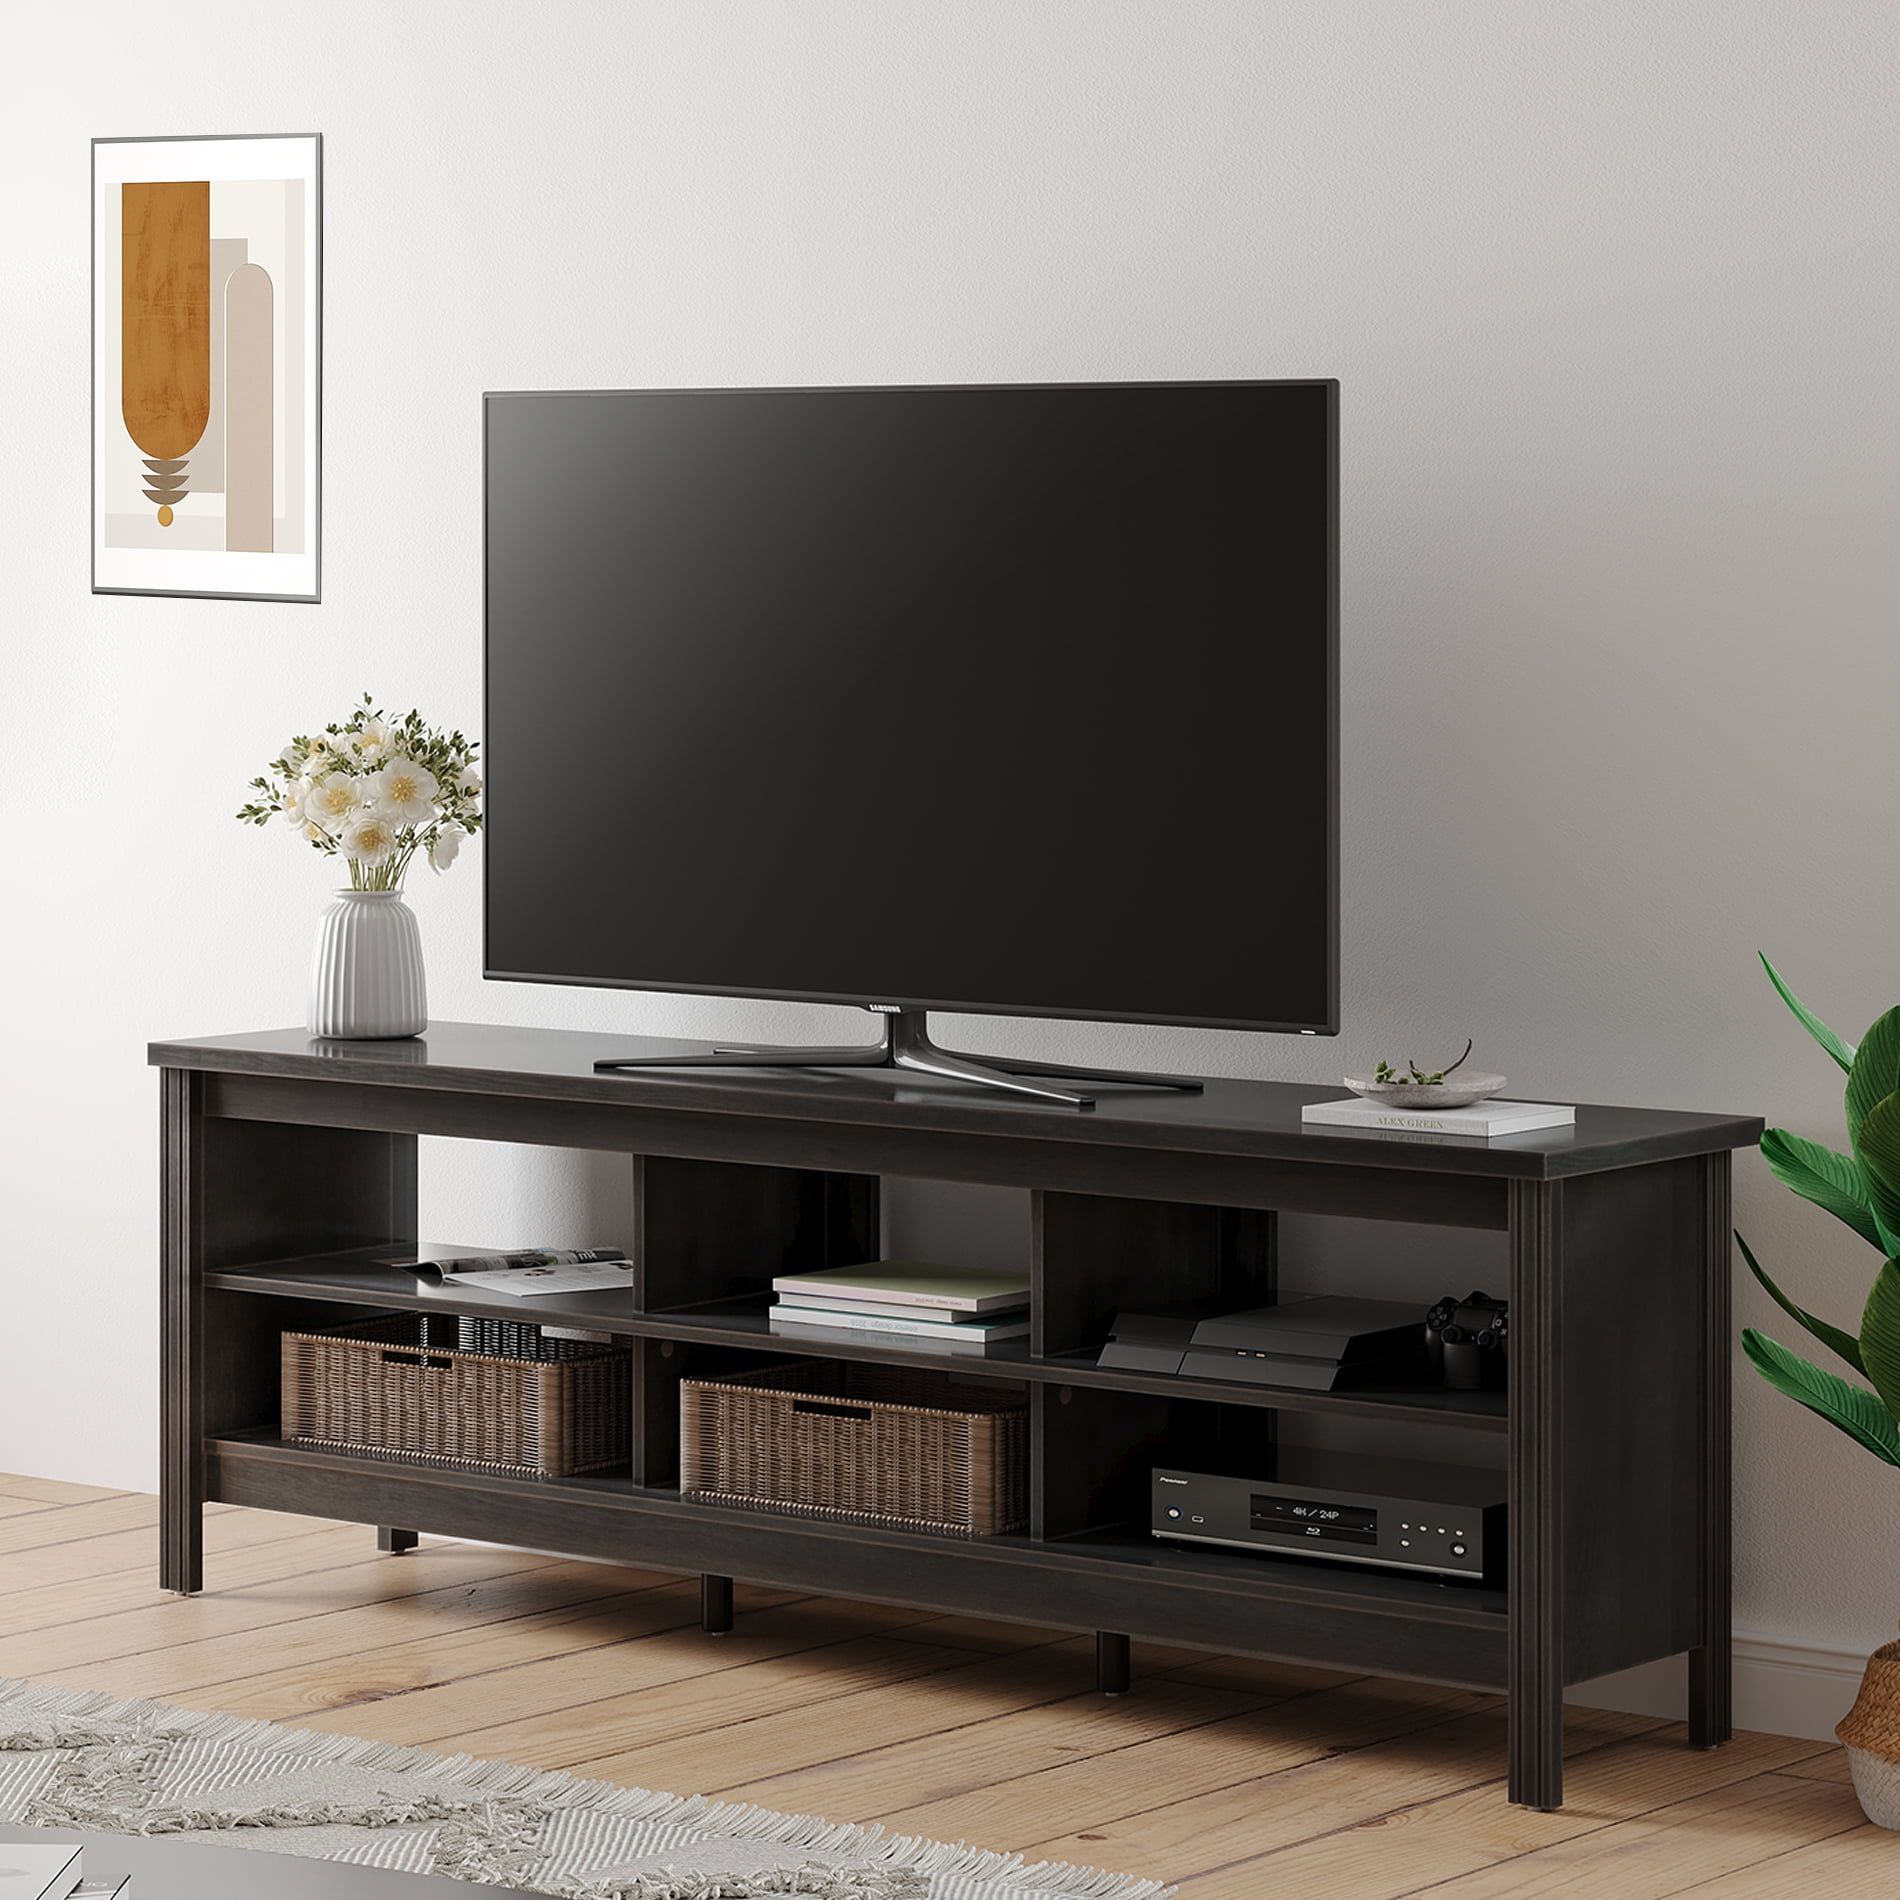 Farmhouse Tv Stand For Tvs Up To 75" Tv Entertainment Center Media Intended For Farmhouse Tv Stands For 70 Inch Tv (View 7 of 20)